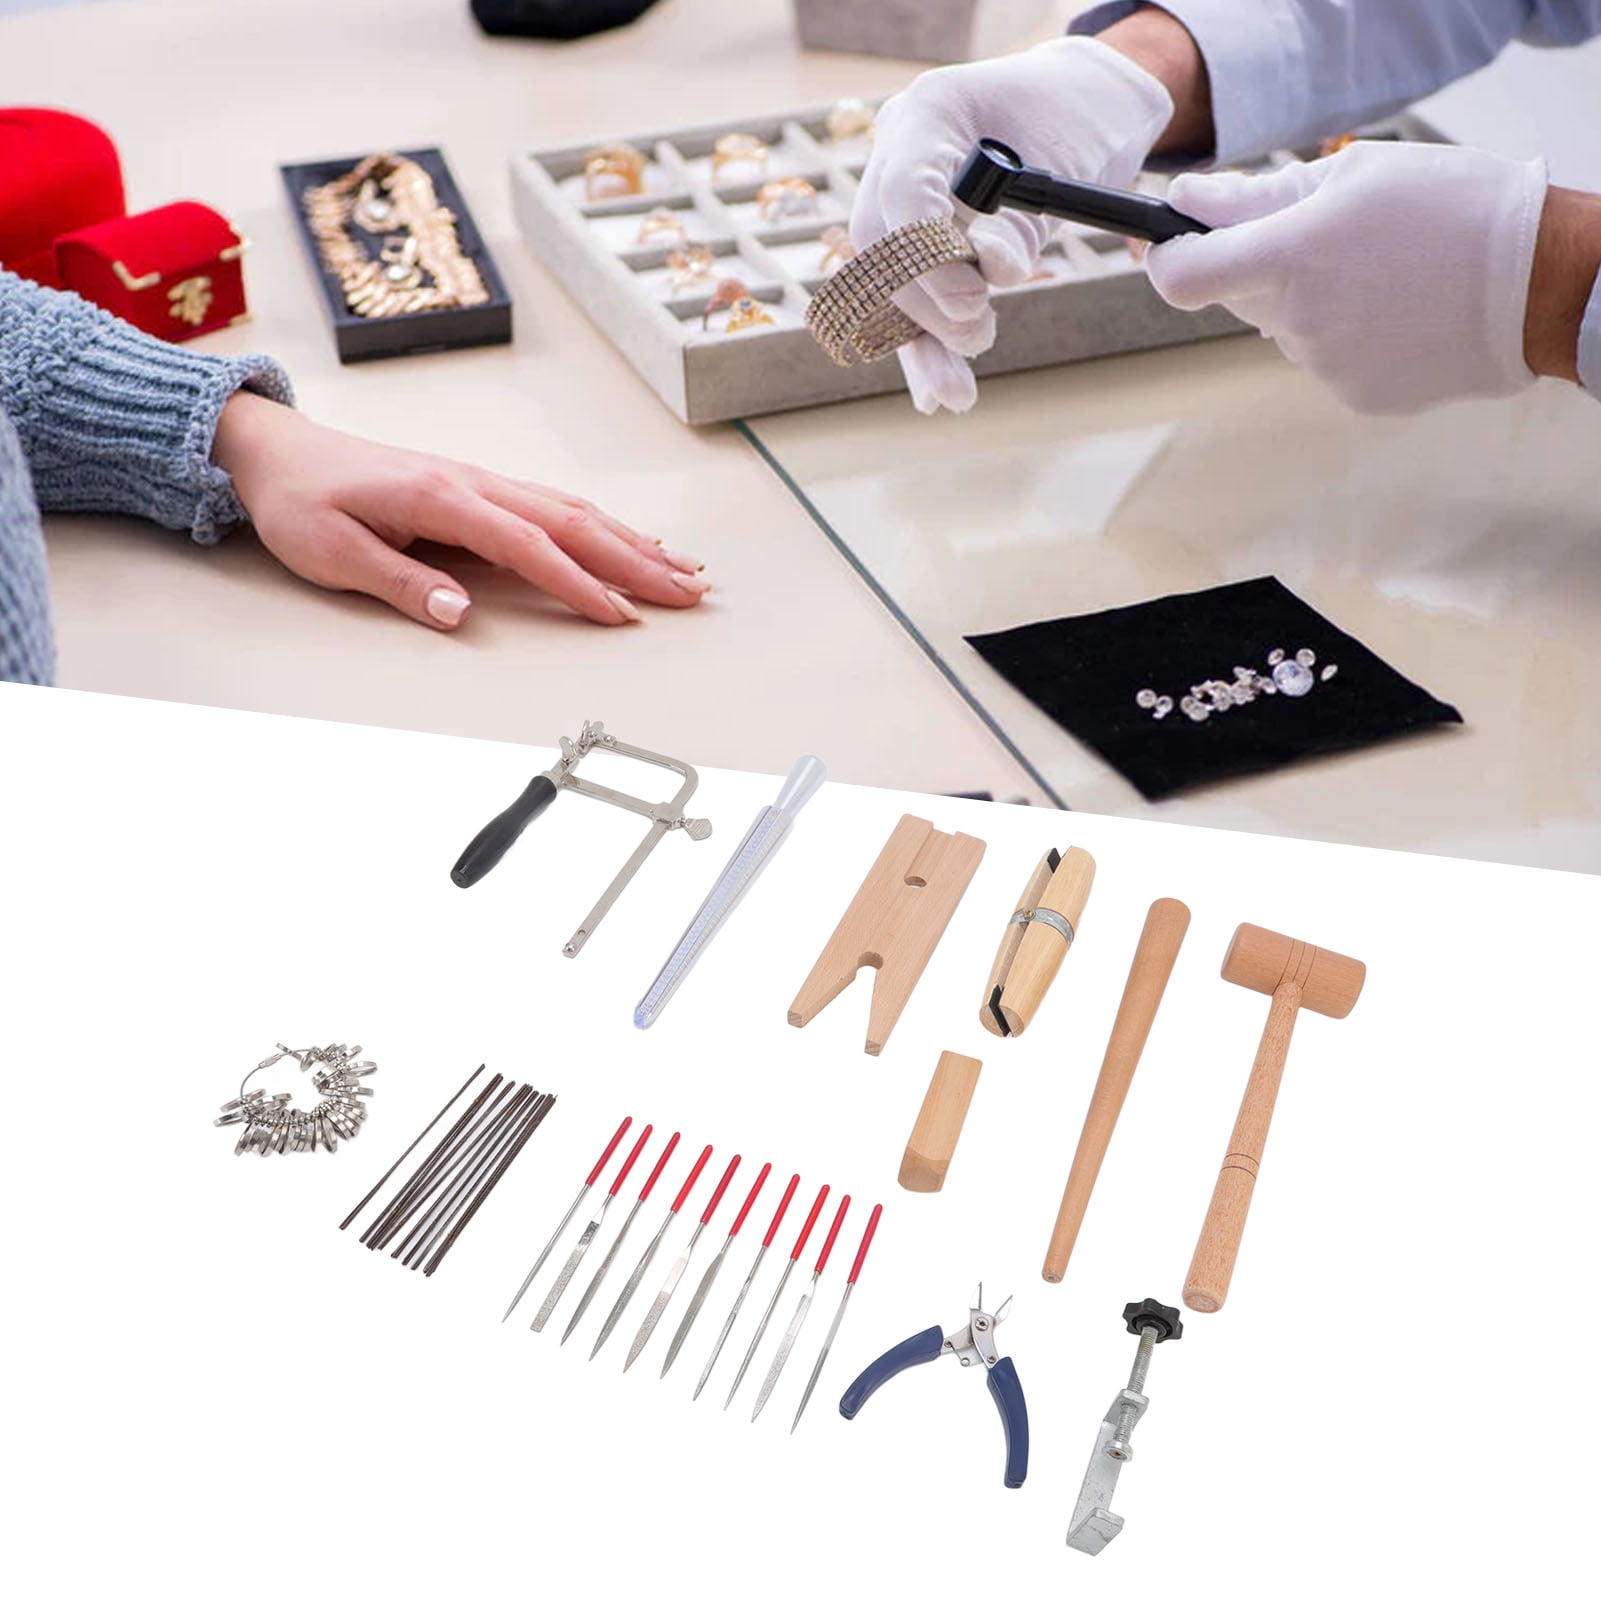 D-FLIFE 19pcs Jewelry Making Tools Kit with Zipper Storage Case for Jewelry Crafting and Jewelry Repair (19pcs)